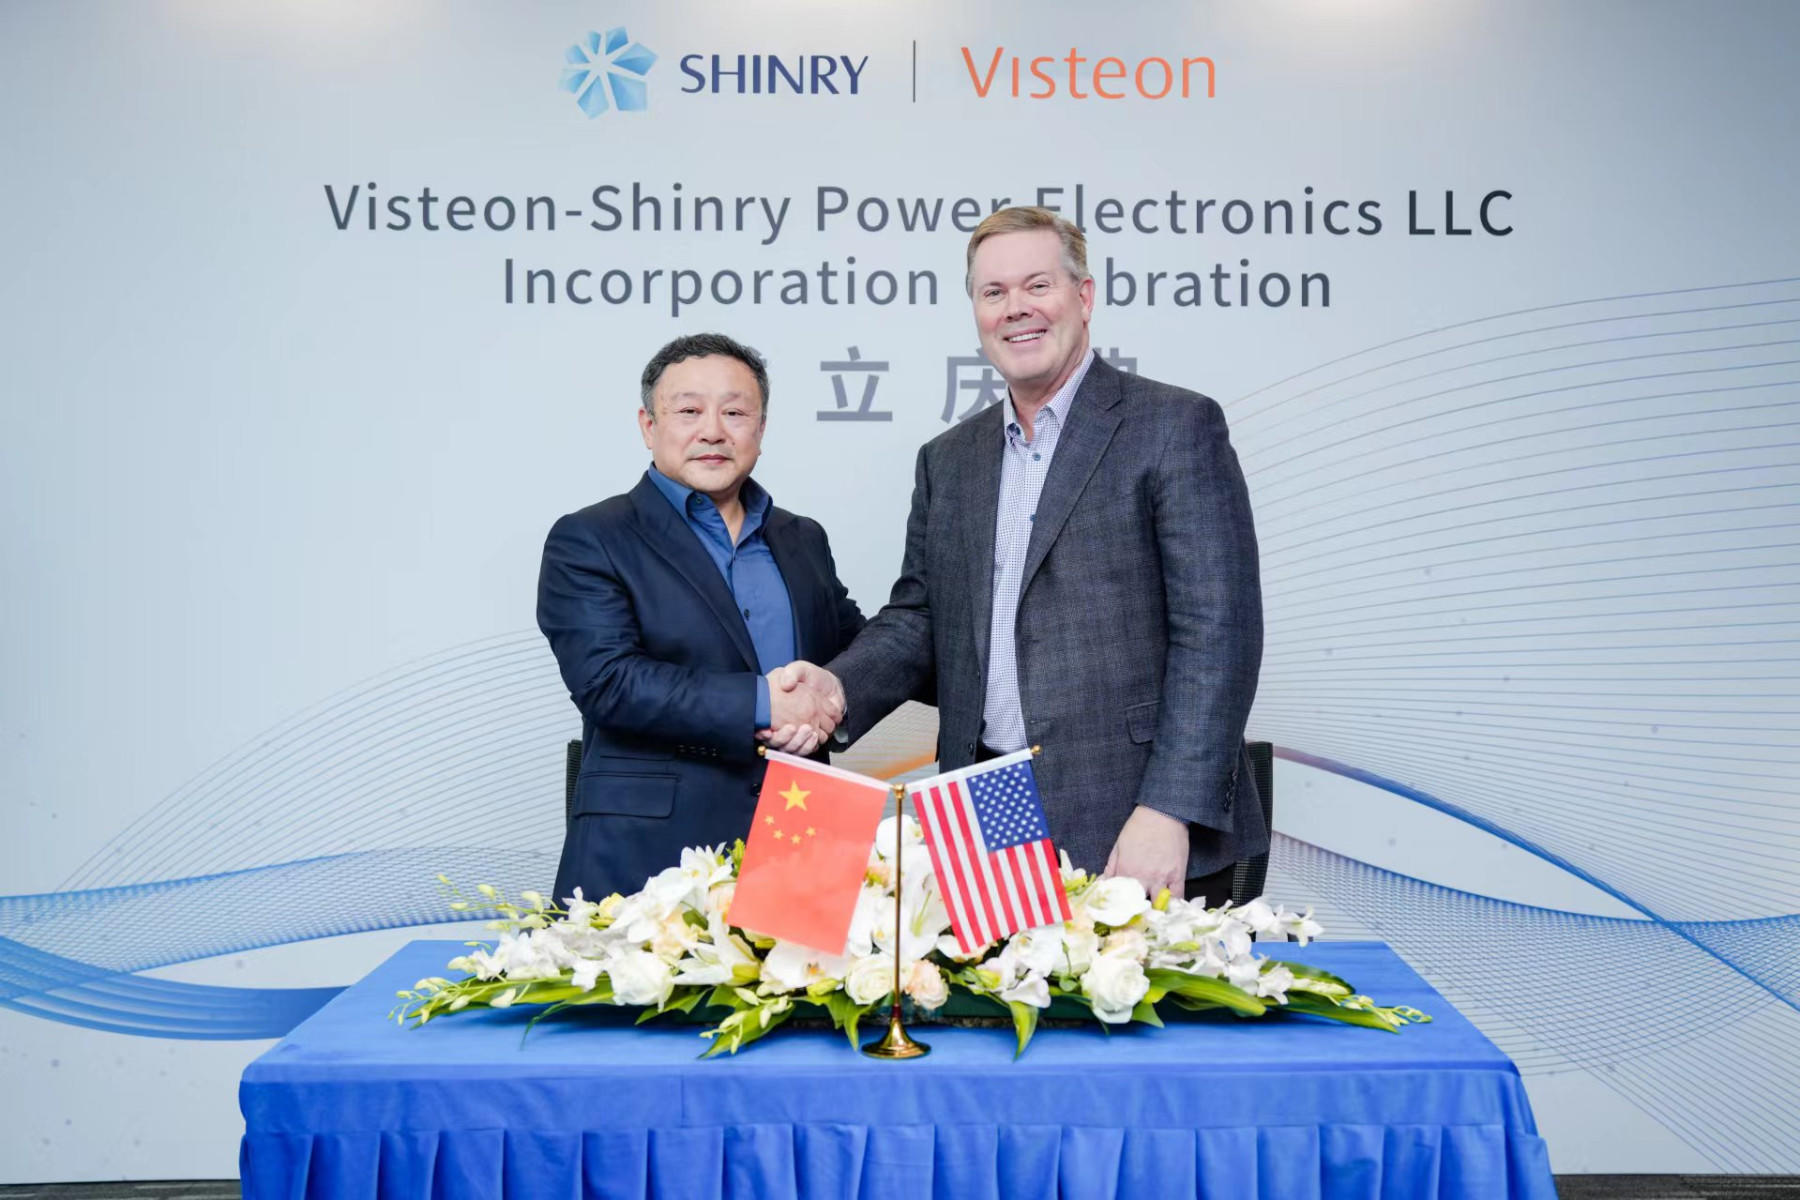 <p>This collaboration brings two best-in-class companies together to further advance the state-of-the-art technologies in power electronics for the automotive industry.</p>